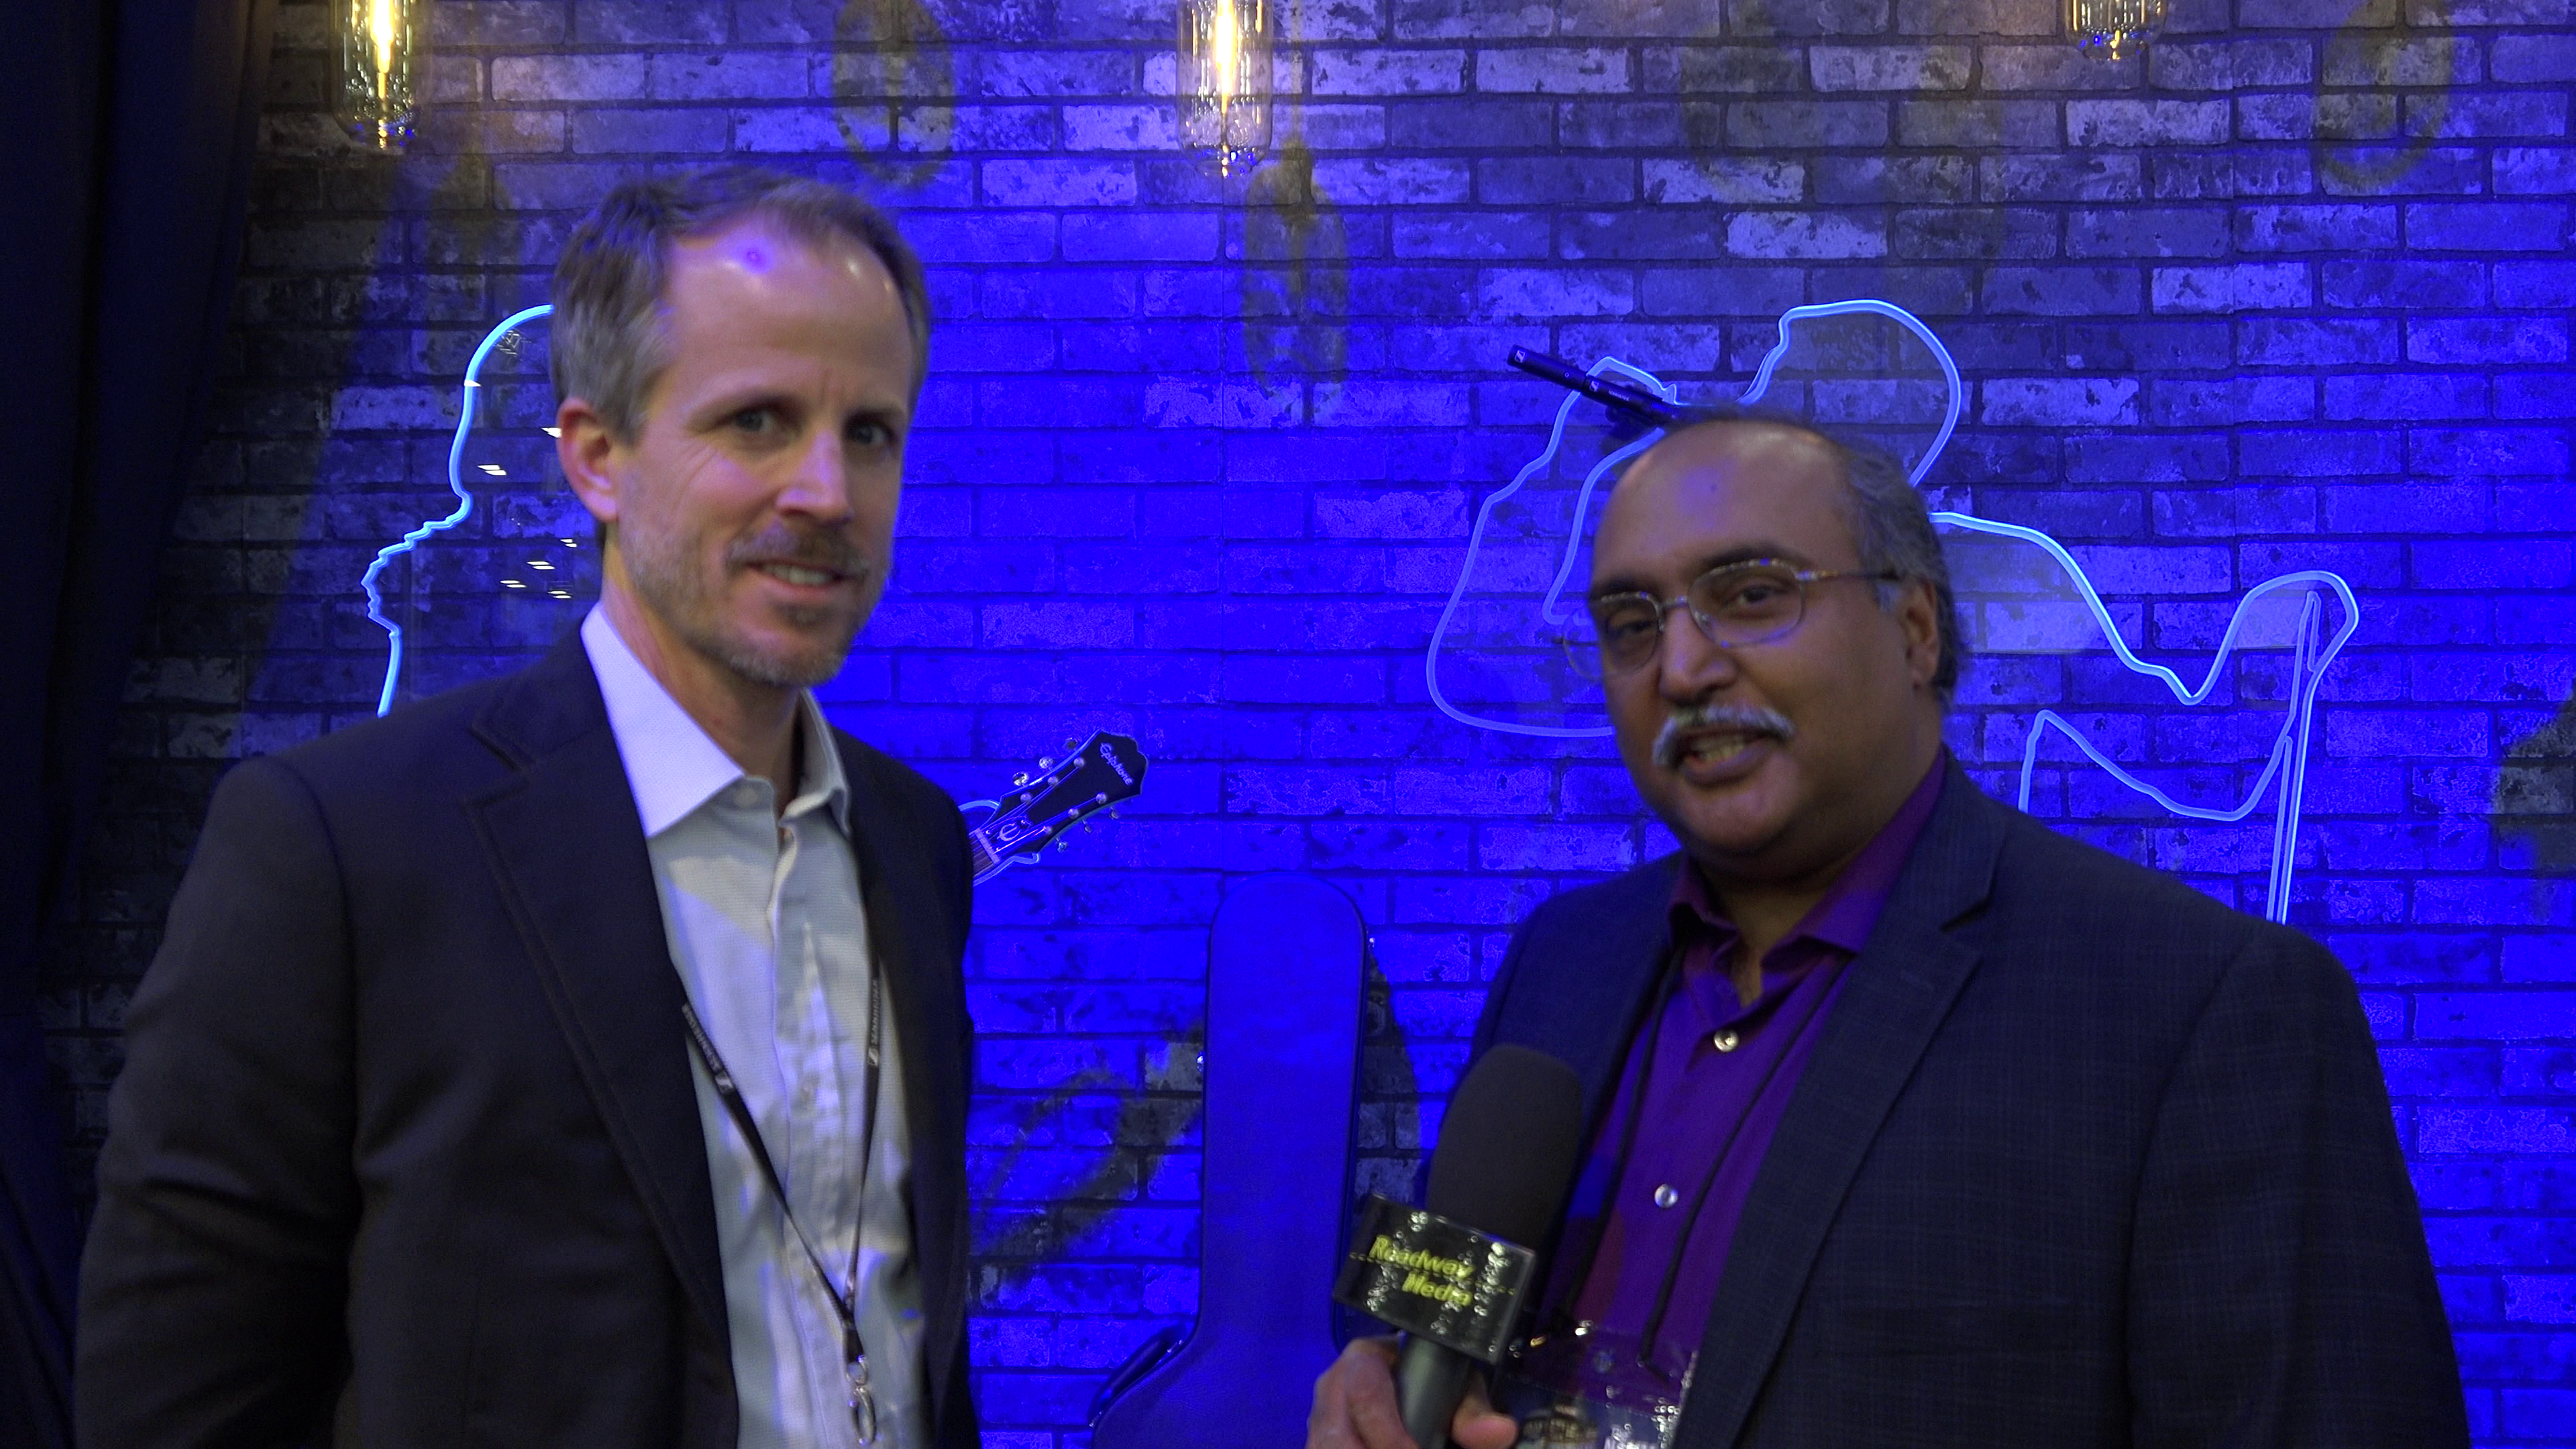 Interview with Andreas Sennheiser at NAMM 2019